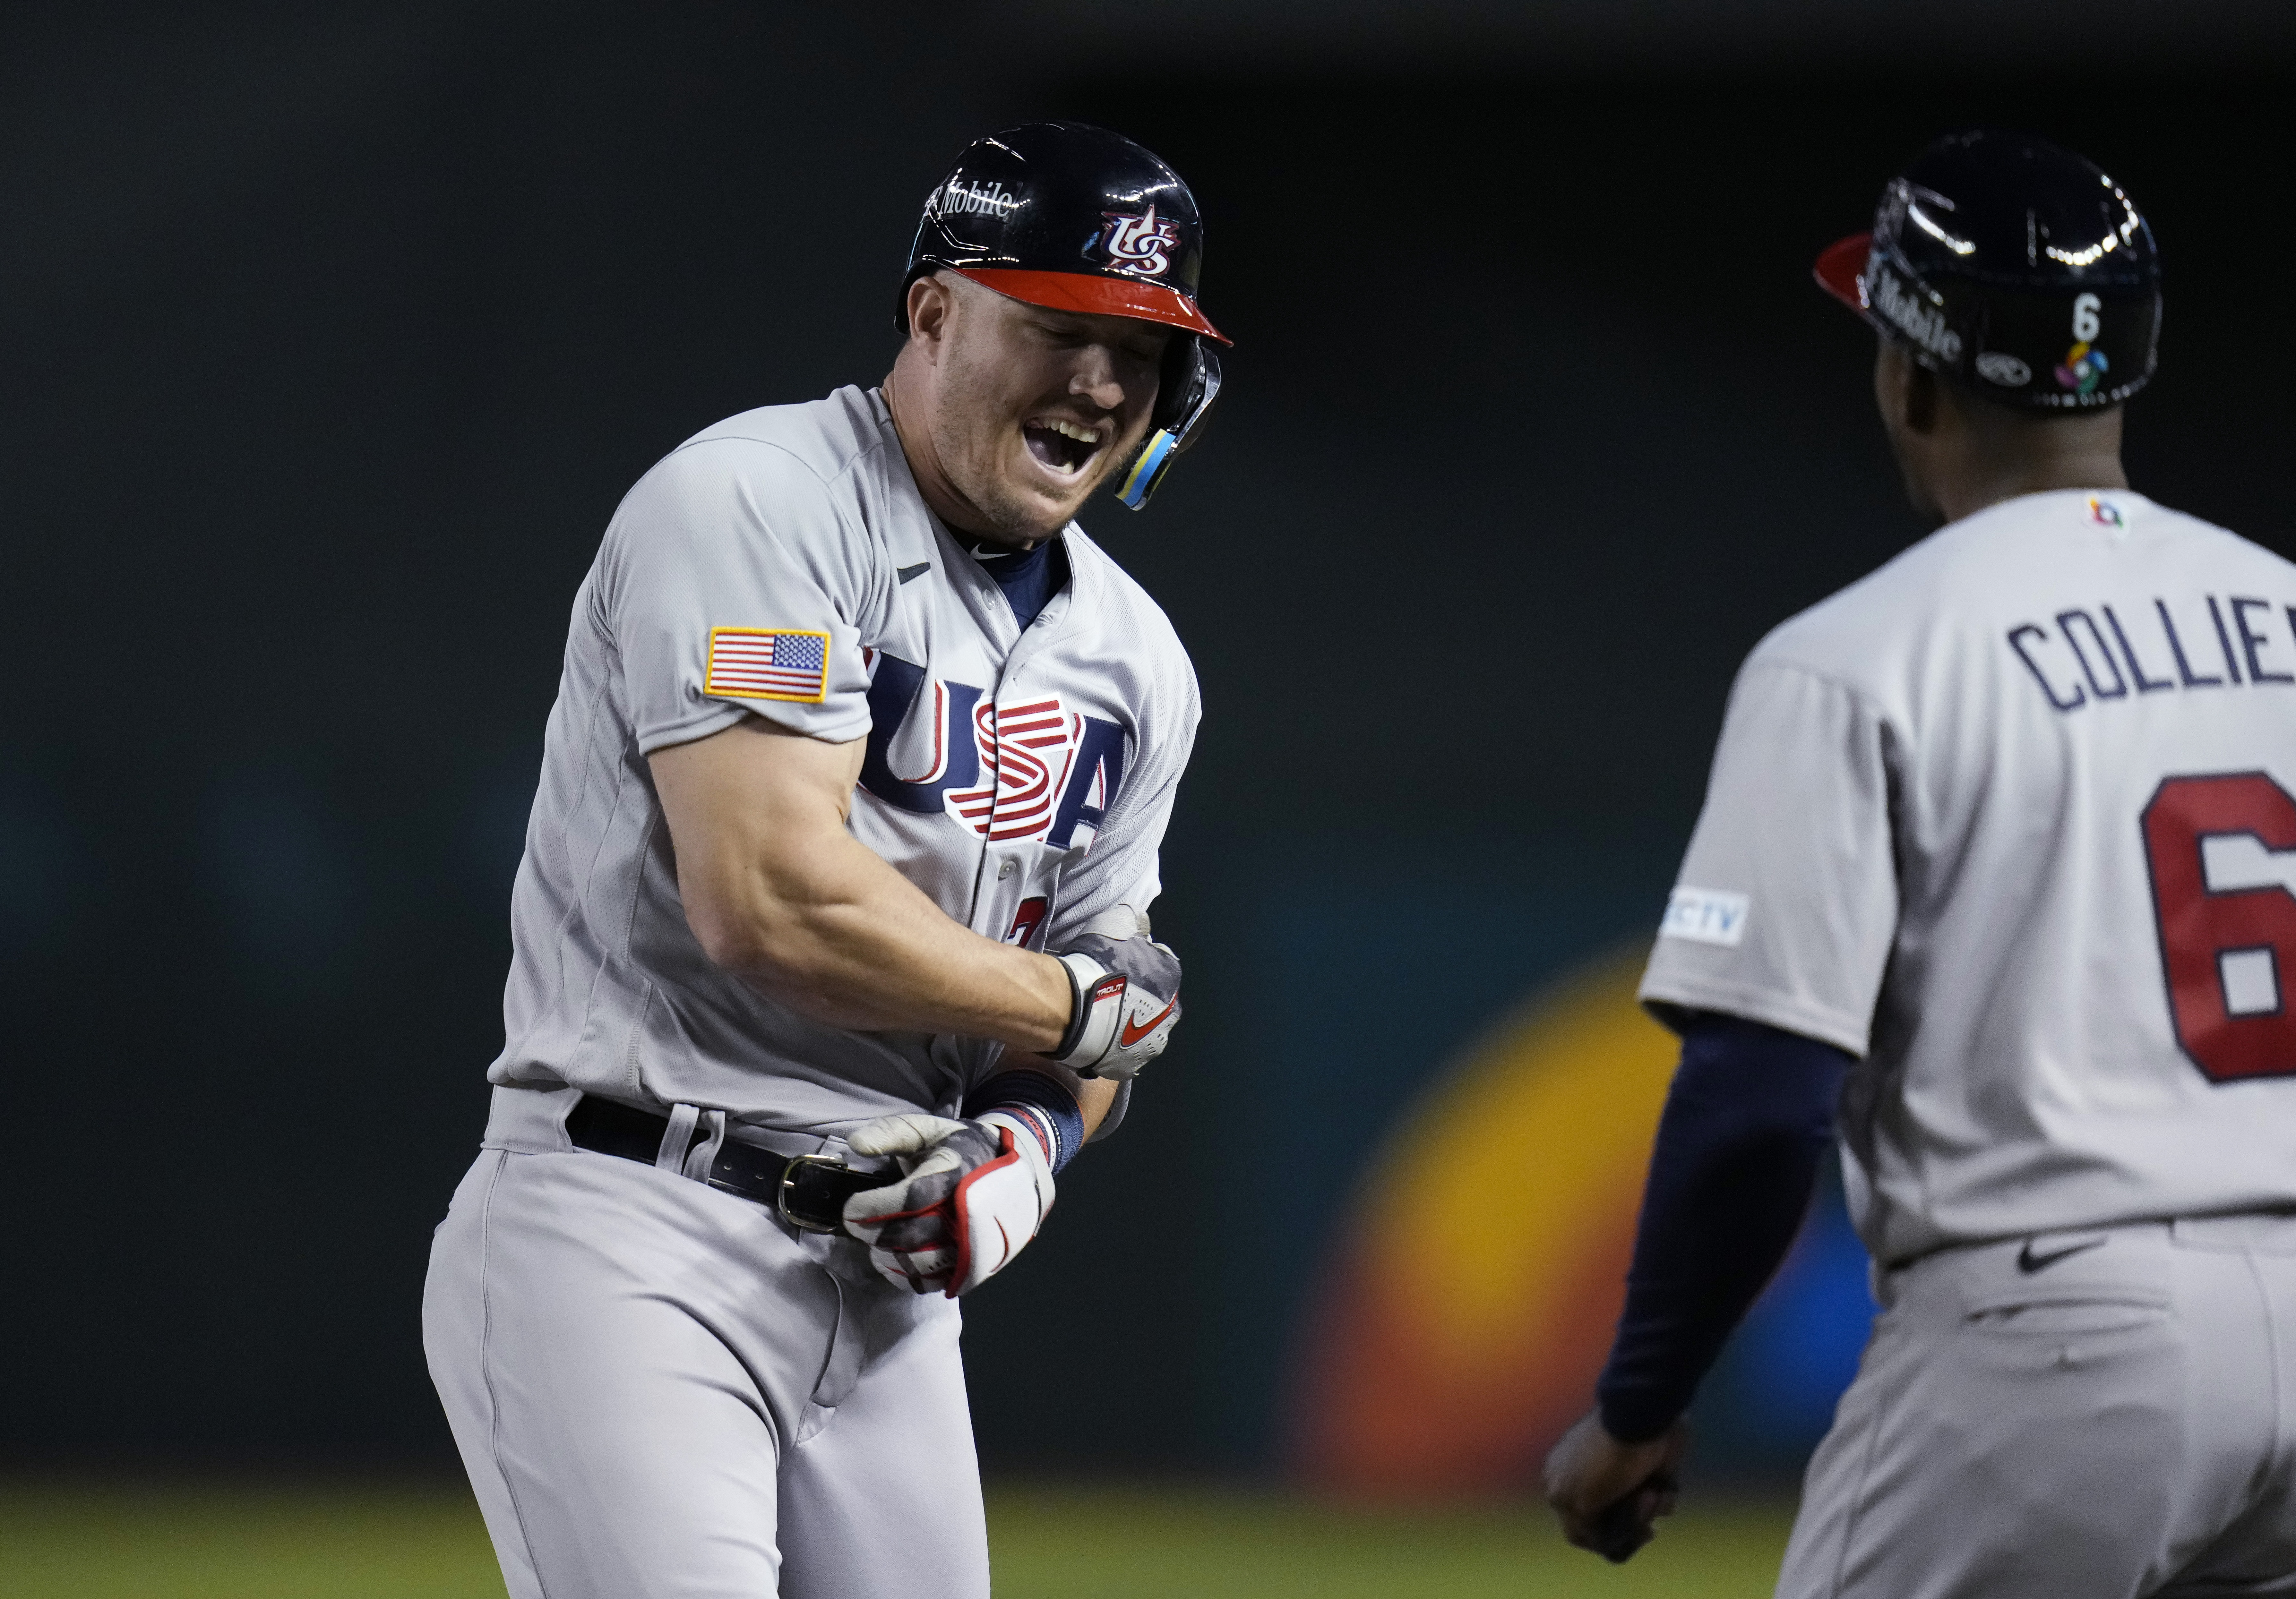 World Baseball Classic: Mike Trout leads the U.S. over Colombia